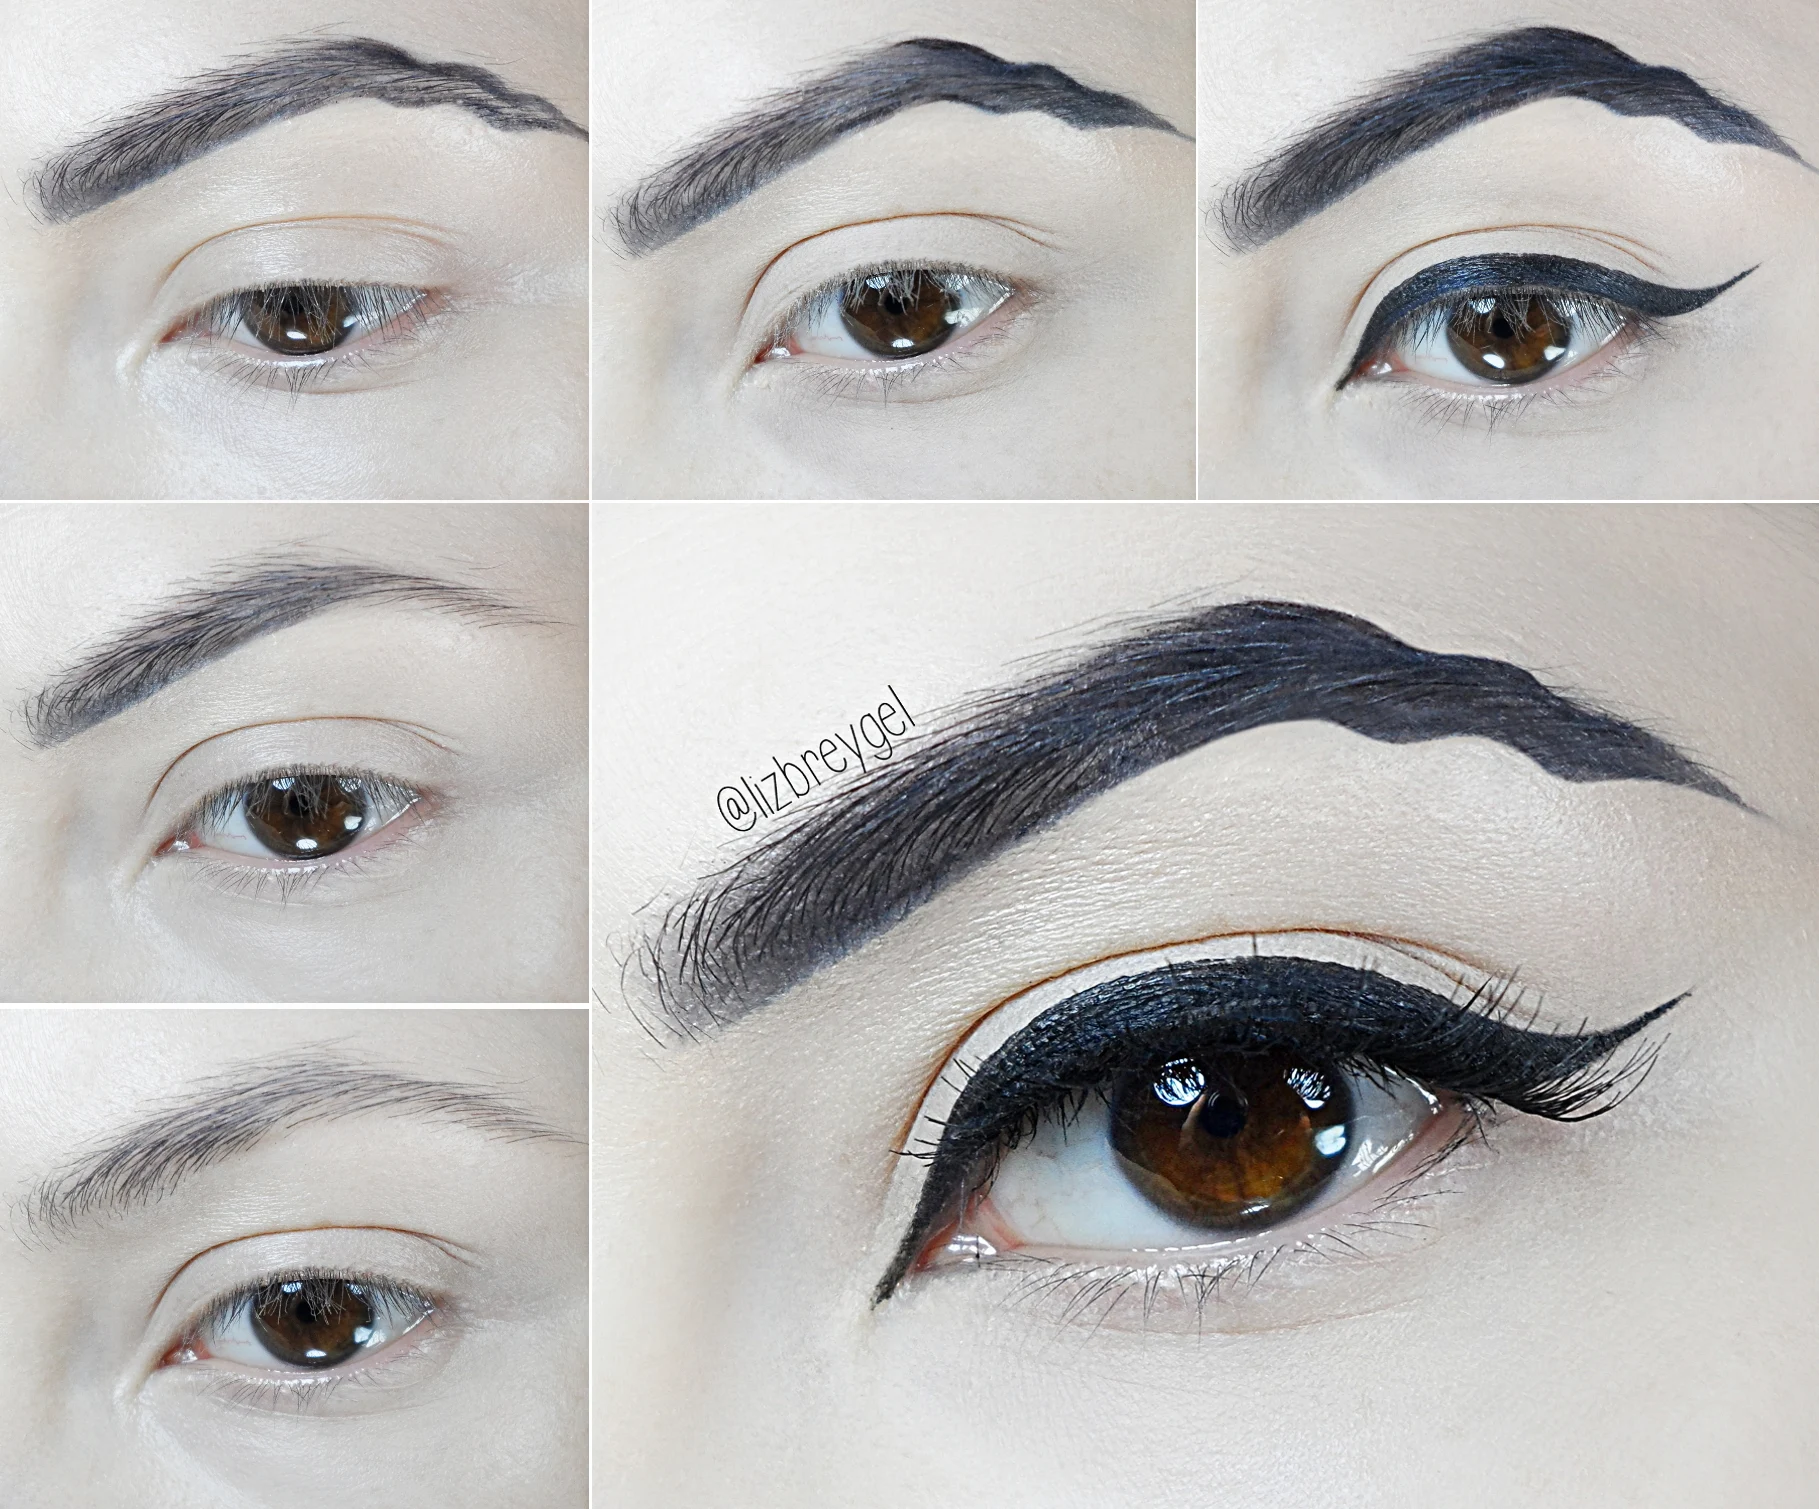 step-by-step makeup pictorial showing how to do the trendy wavy or squiggly eyebrow makeup look